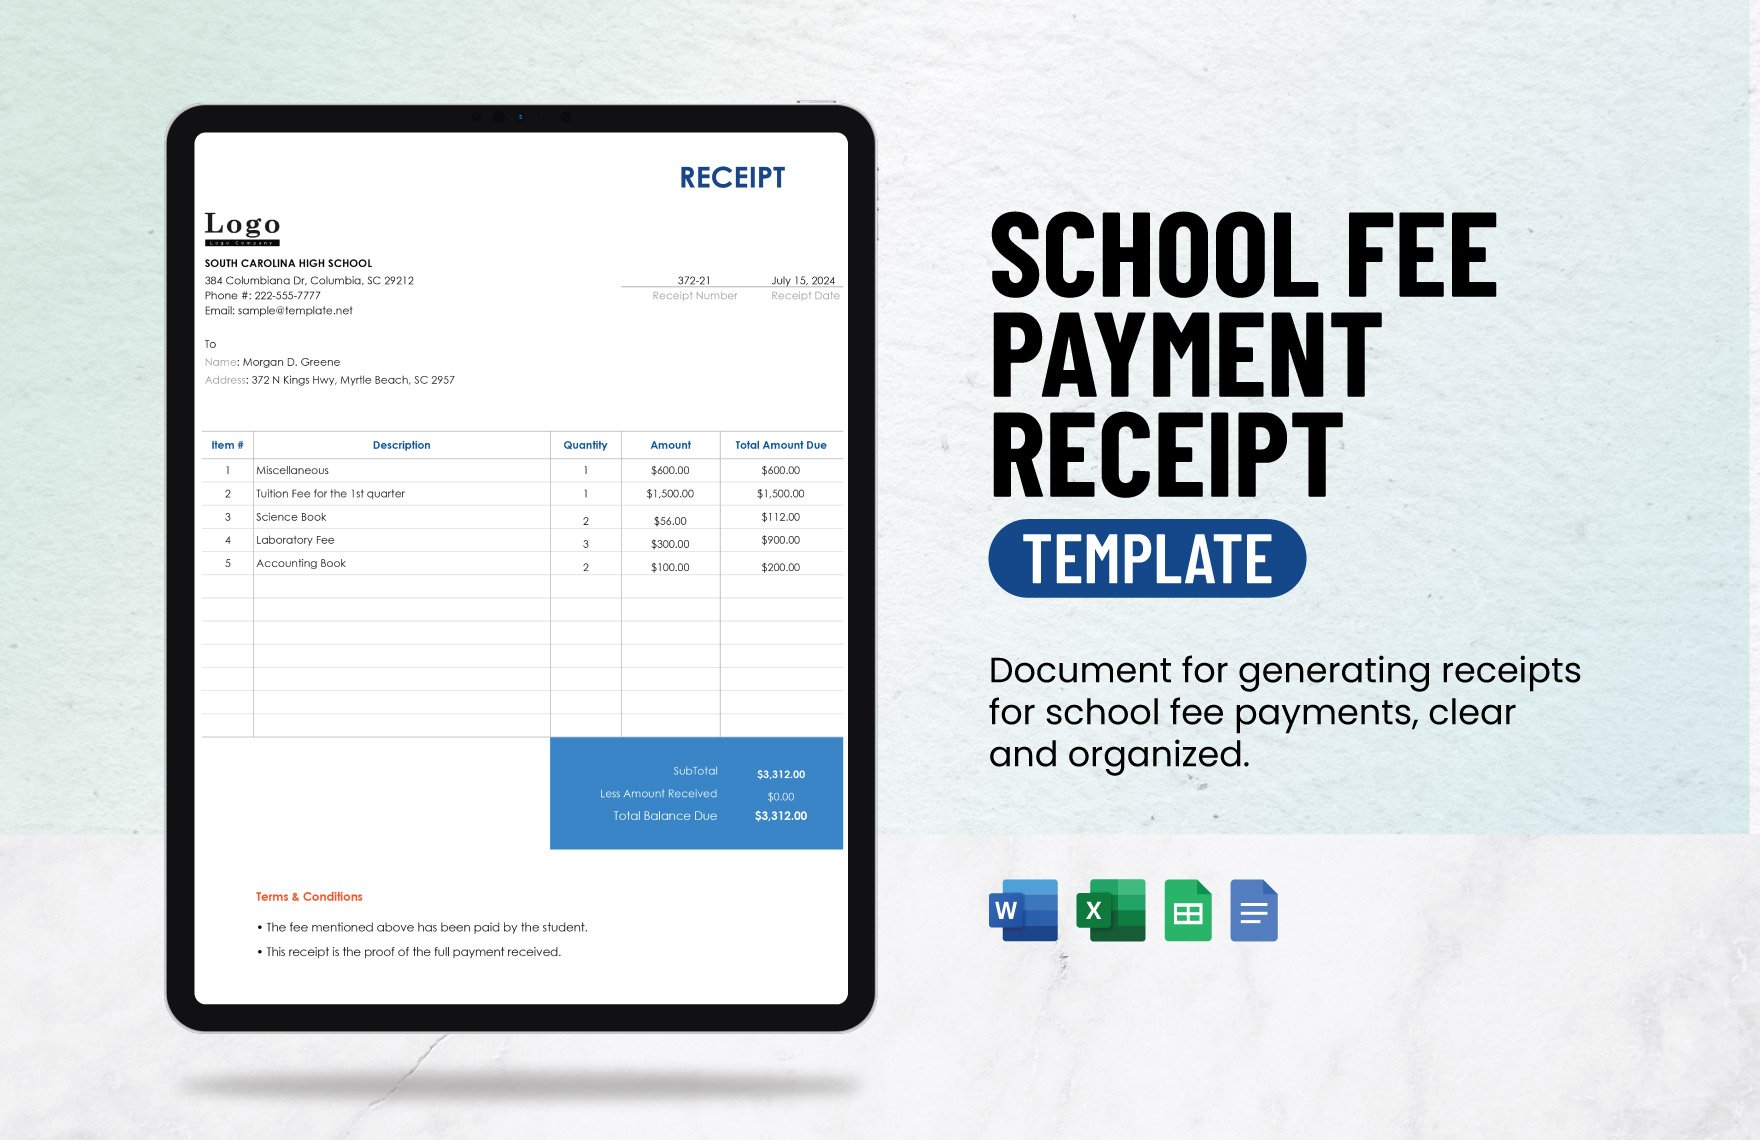 School Fee Payment Receipt Template in Word, Google Docs, Excel, Google Sheets